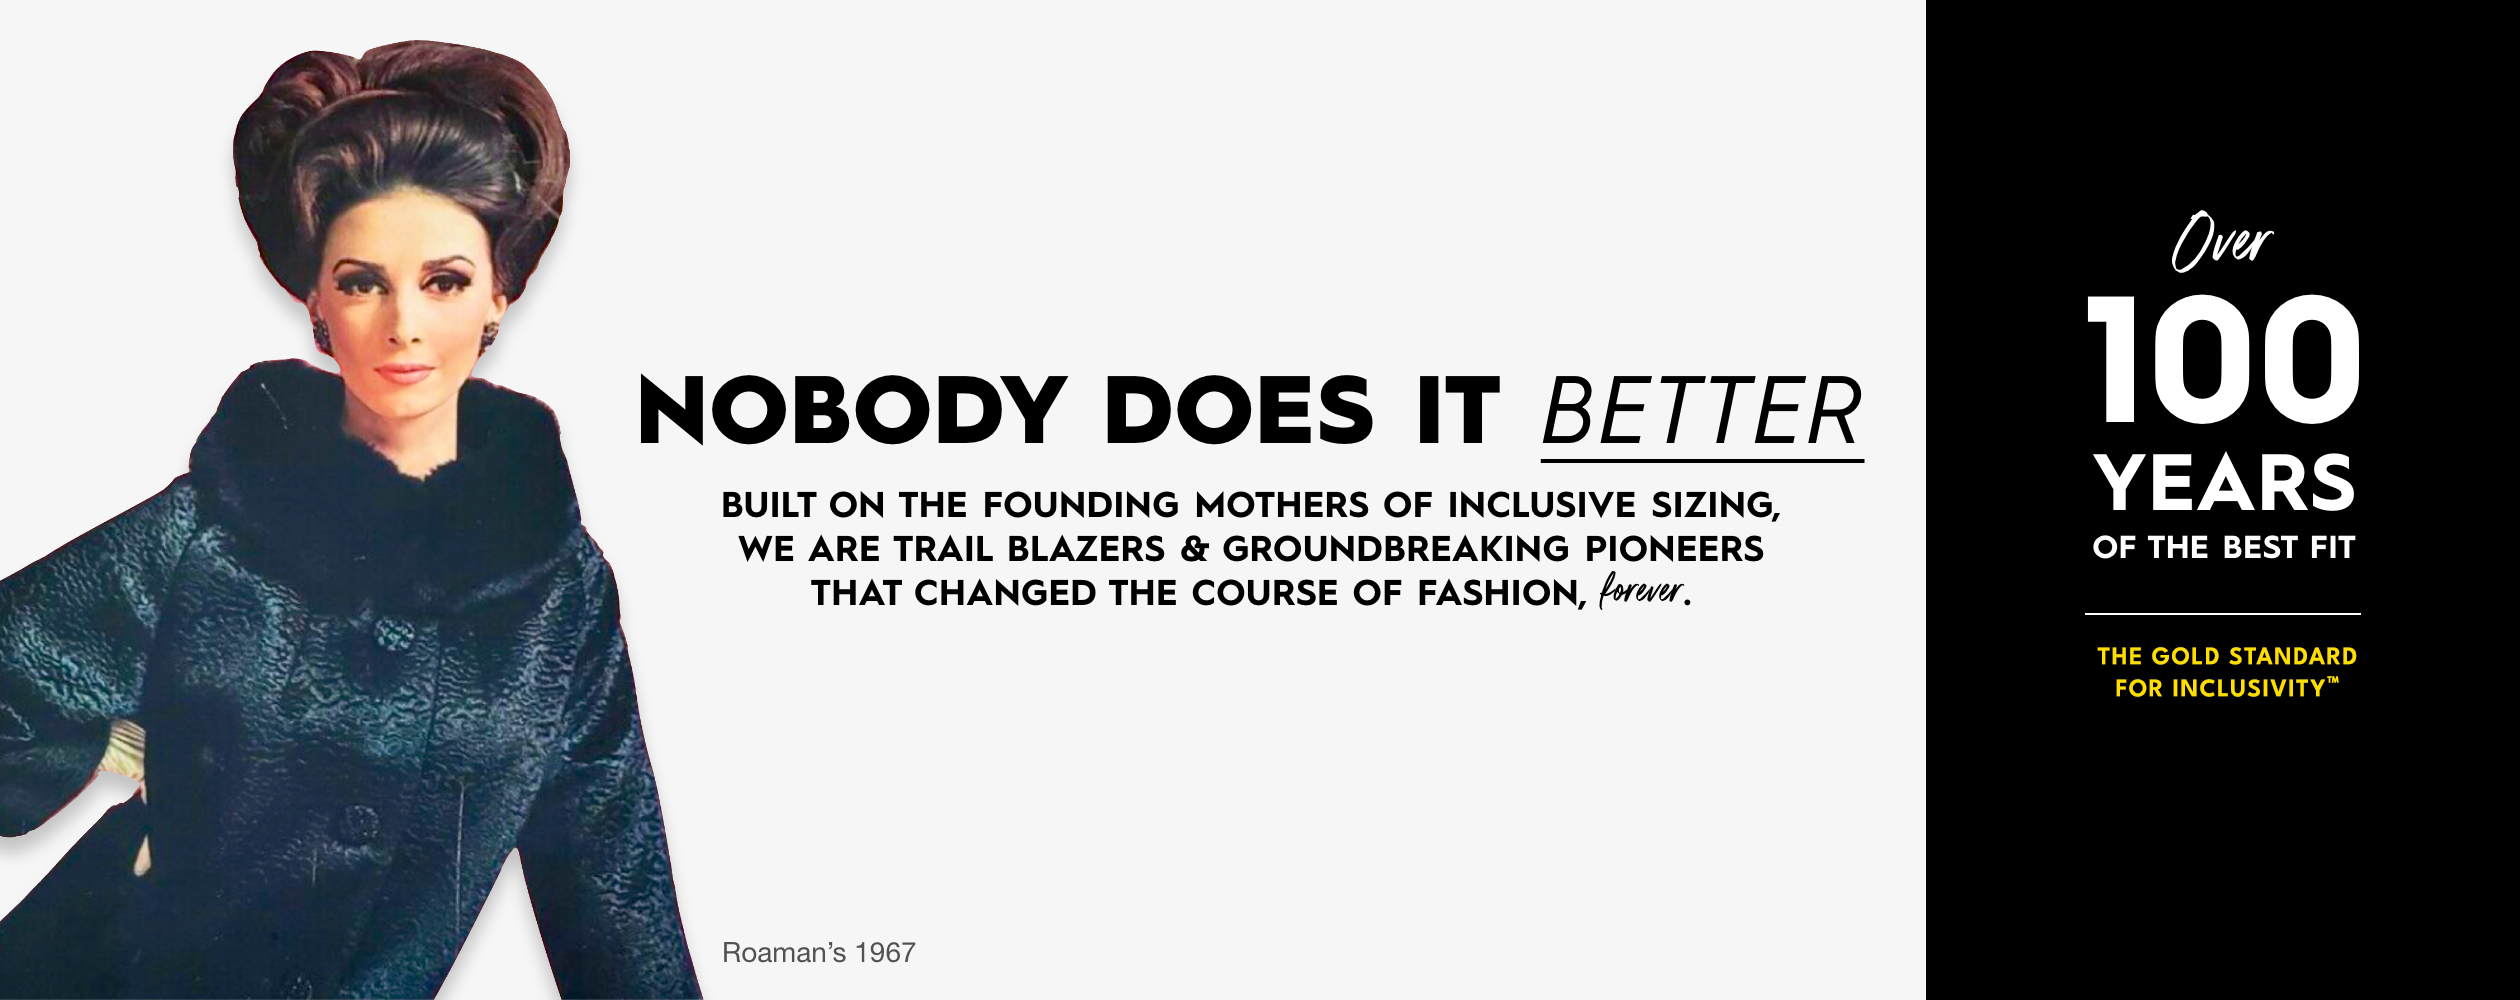 Our 100 Years of the Best Fit | The Gold Standard of Inclusivity.